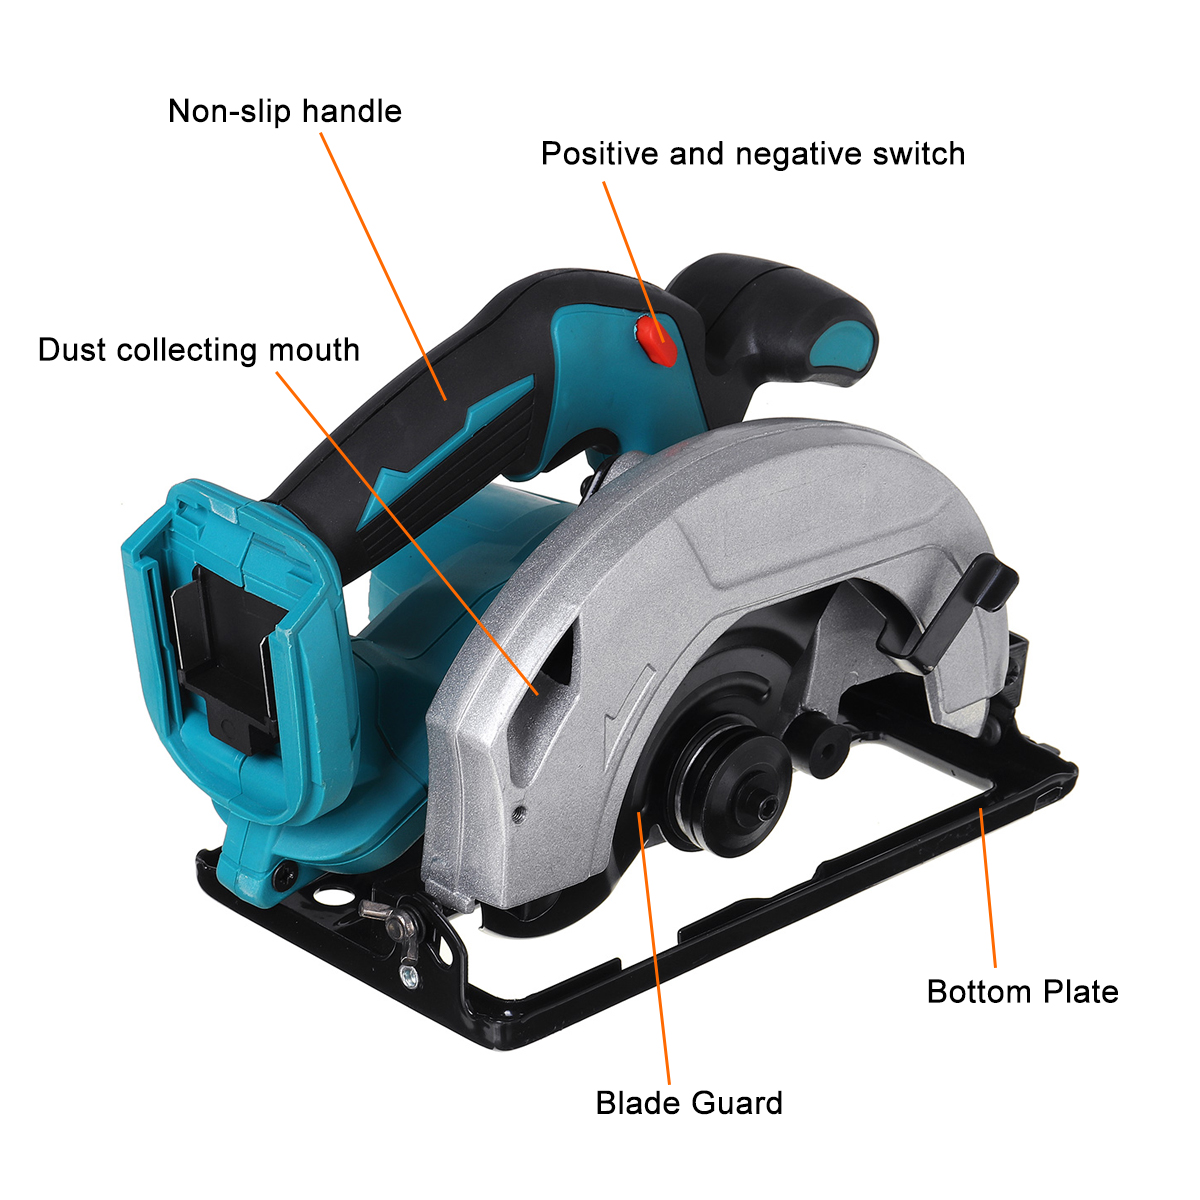 Image of the circular saw with its included items